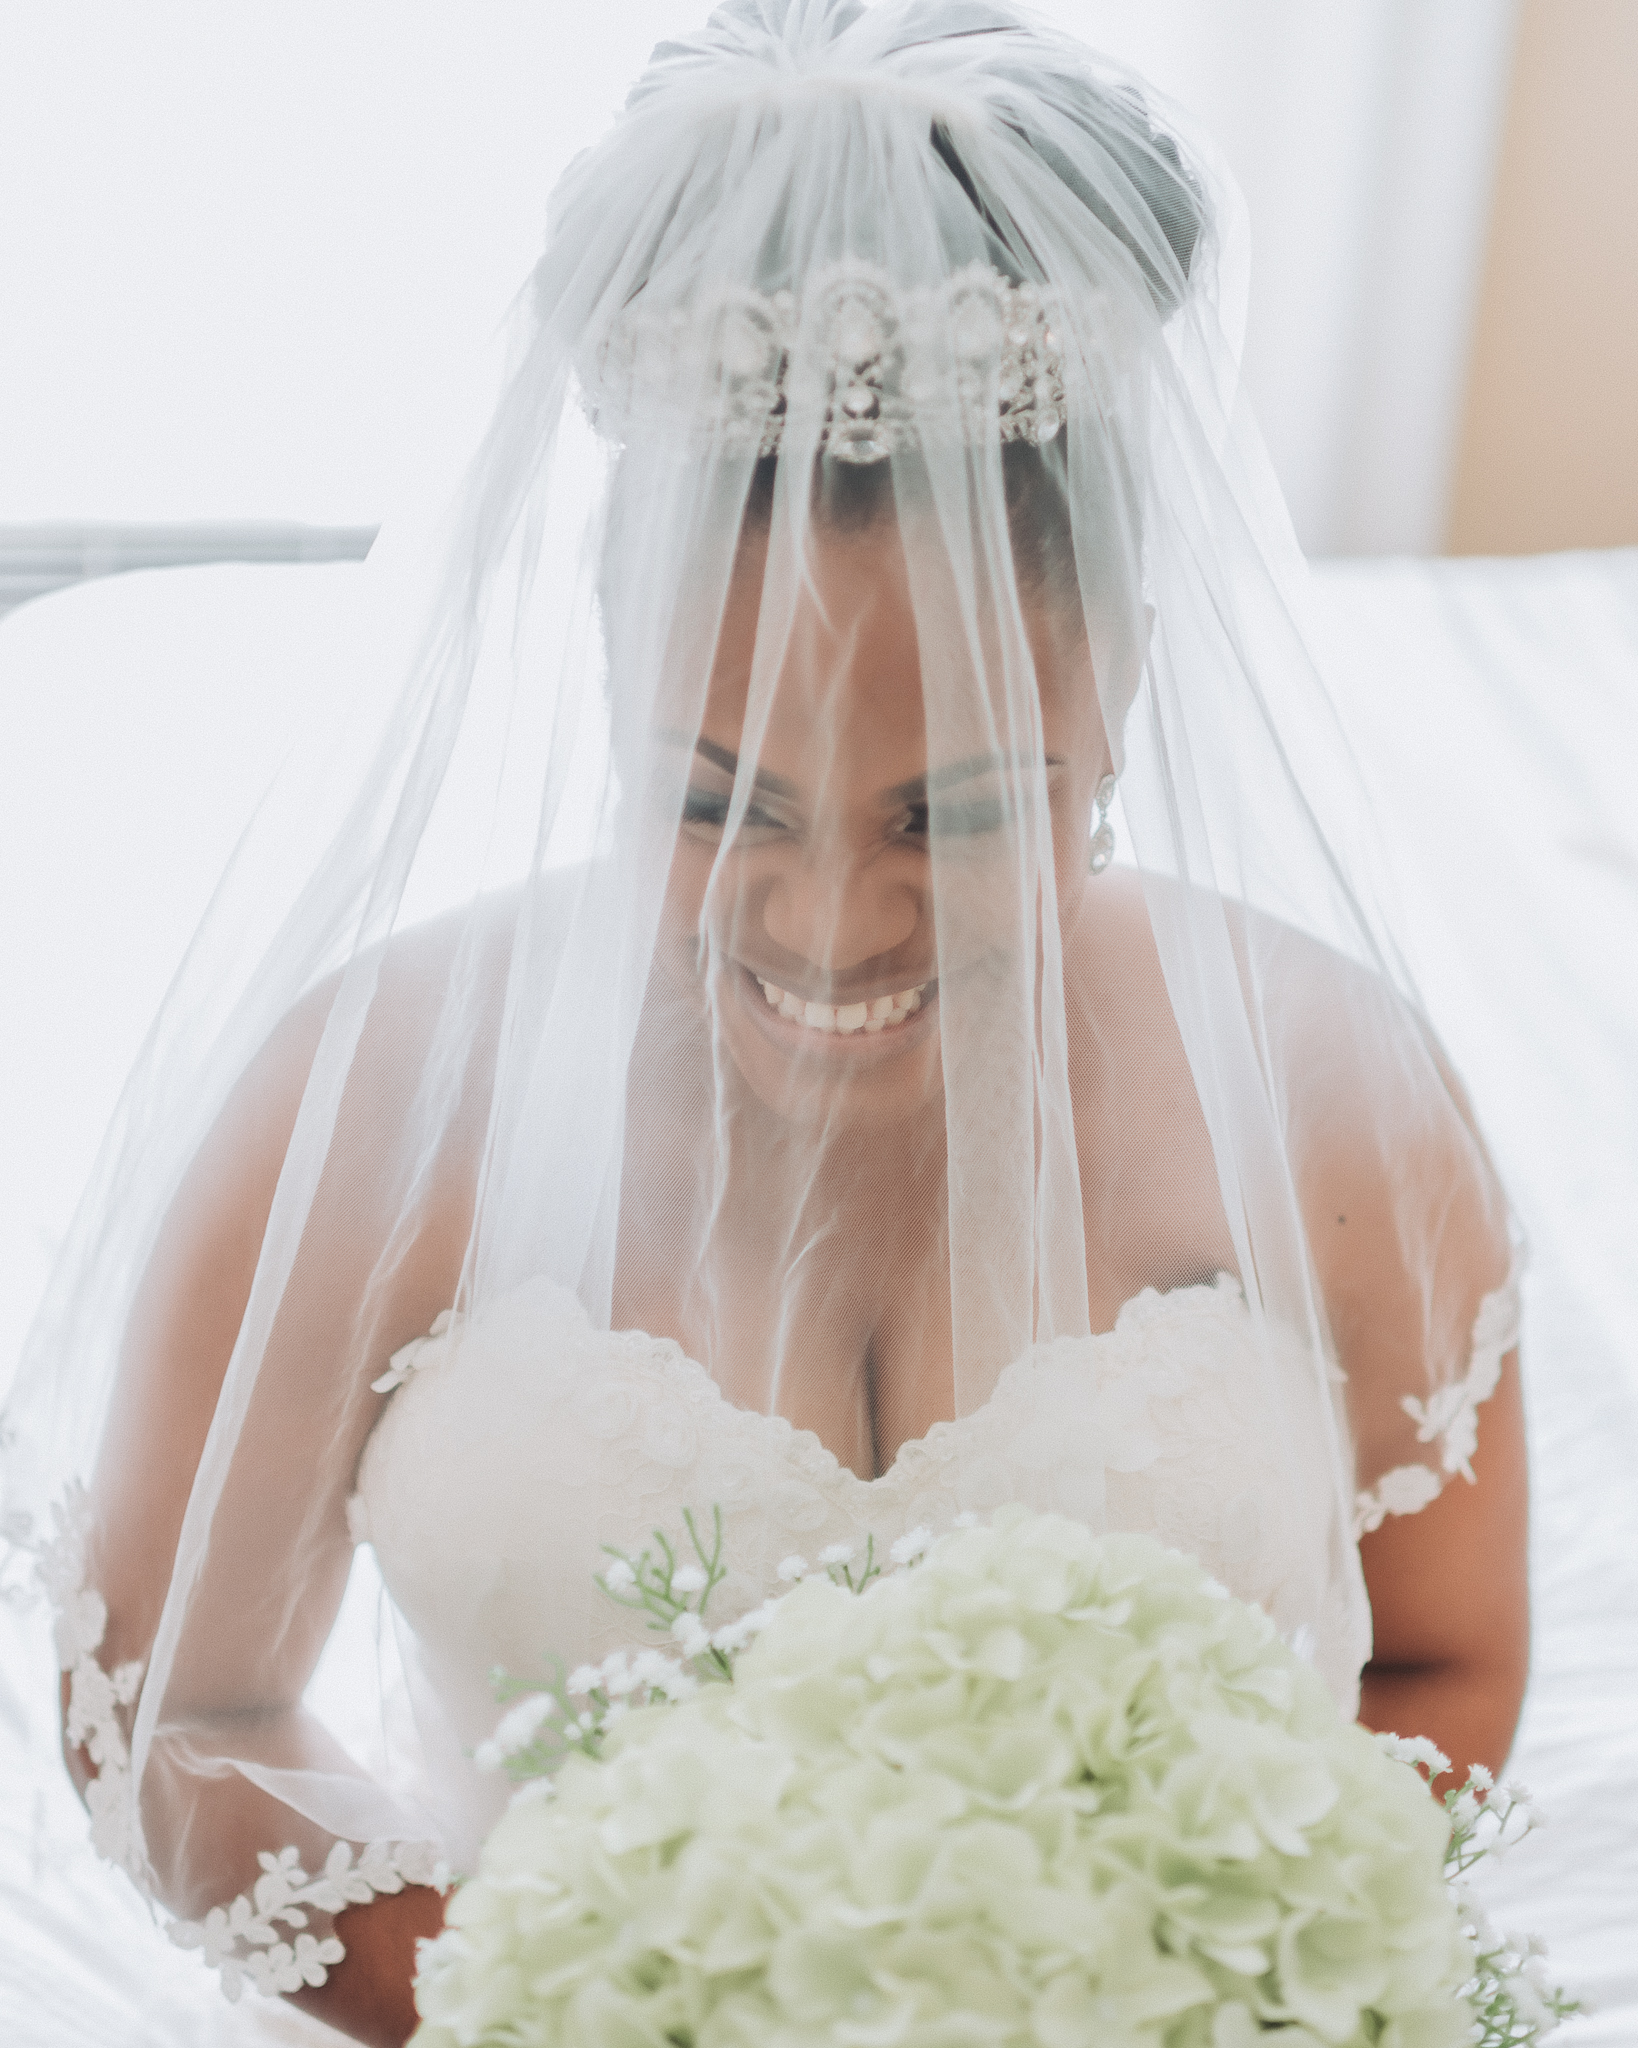 Stunning bride with veil over her head, smiling from ear to ear. Waiting patiently to walk down the aisle